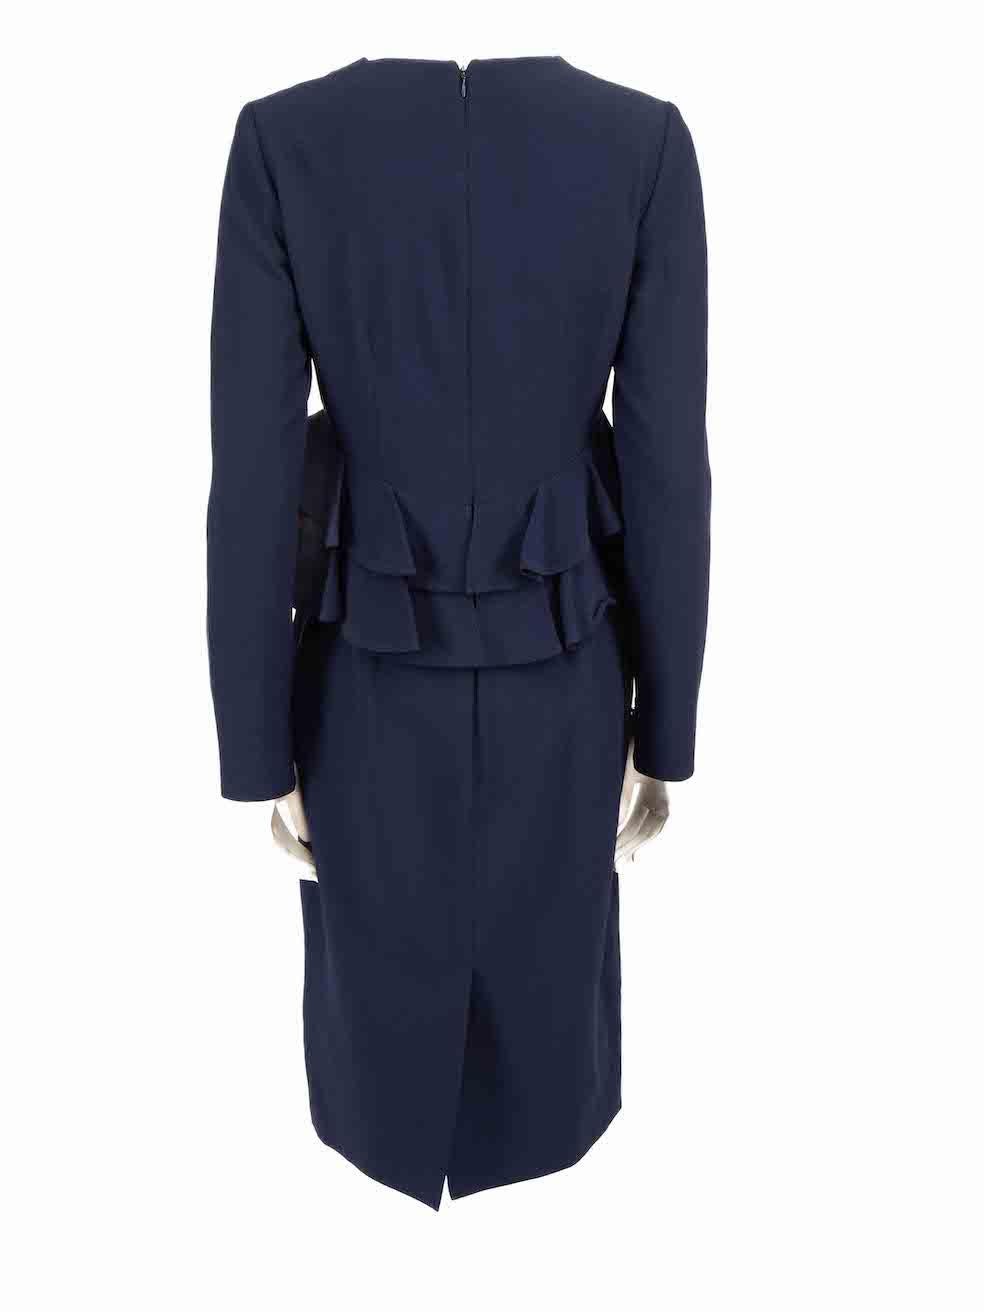 Alexander McQueen A/W14 Navy Ruffled Midi Dress Size M In Excellent Condition For Sale In London, GB